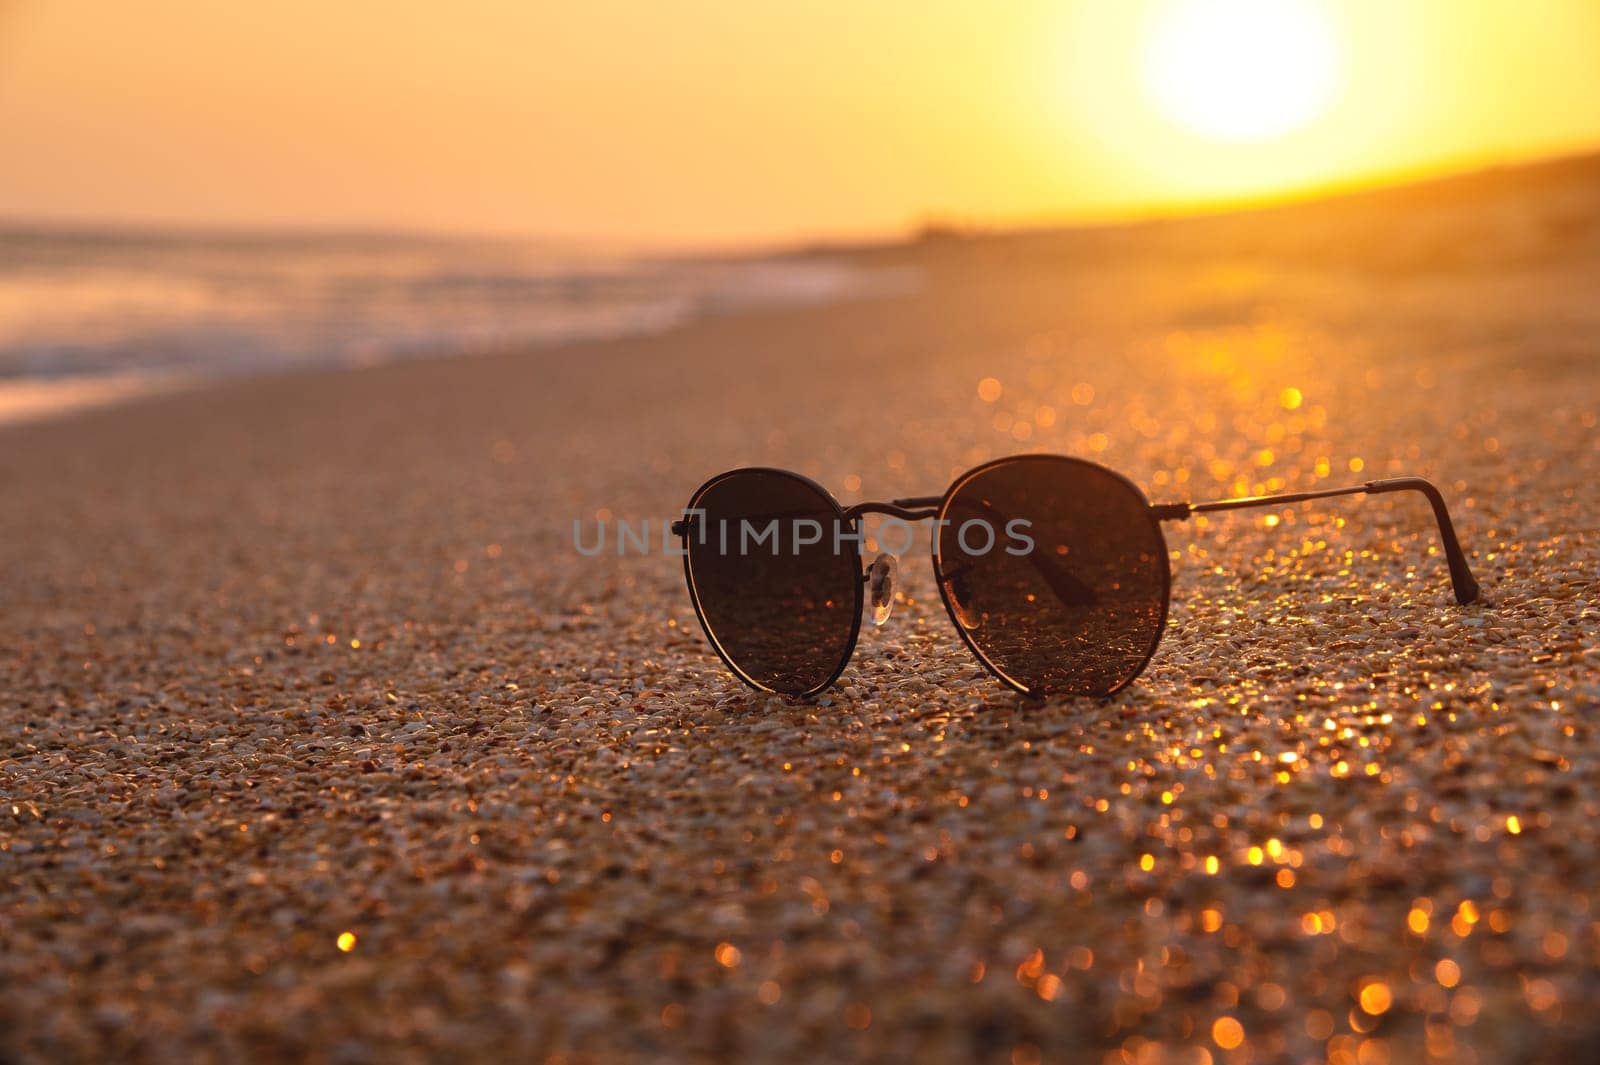 Sunglasses on the beach, lie on the sandy sand at sunset. Concept of beach holiday, serenity by yanik88